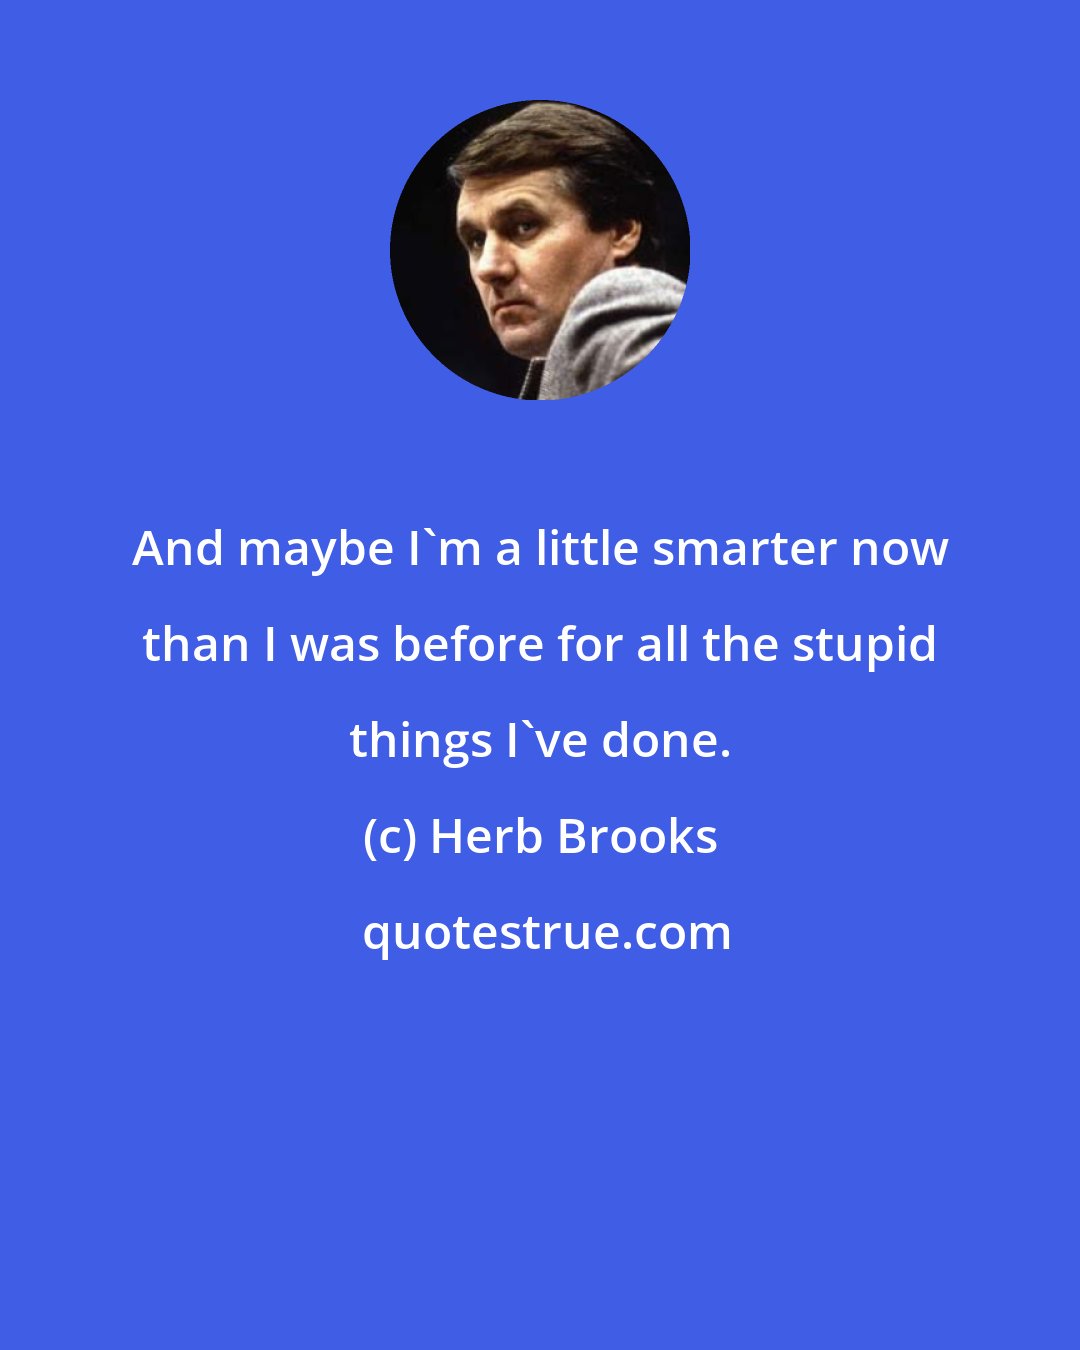 Herb Brooks: And maybe I'm a little smarter now than I was before for all the stupid things I've done.